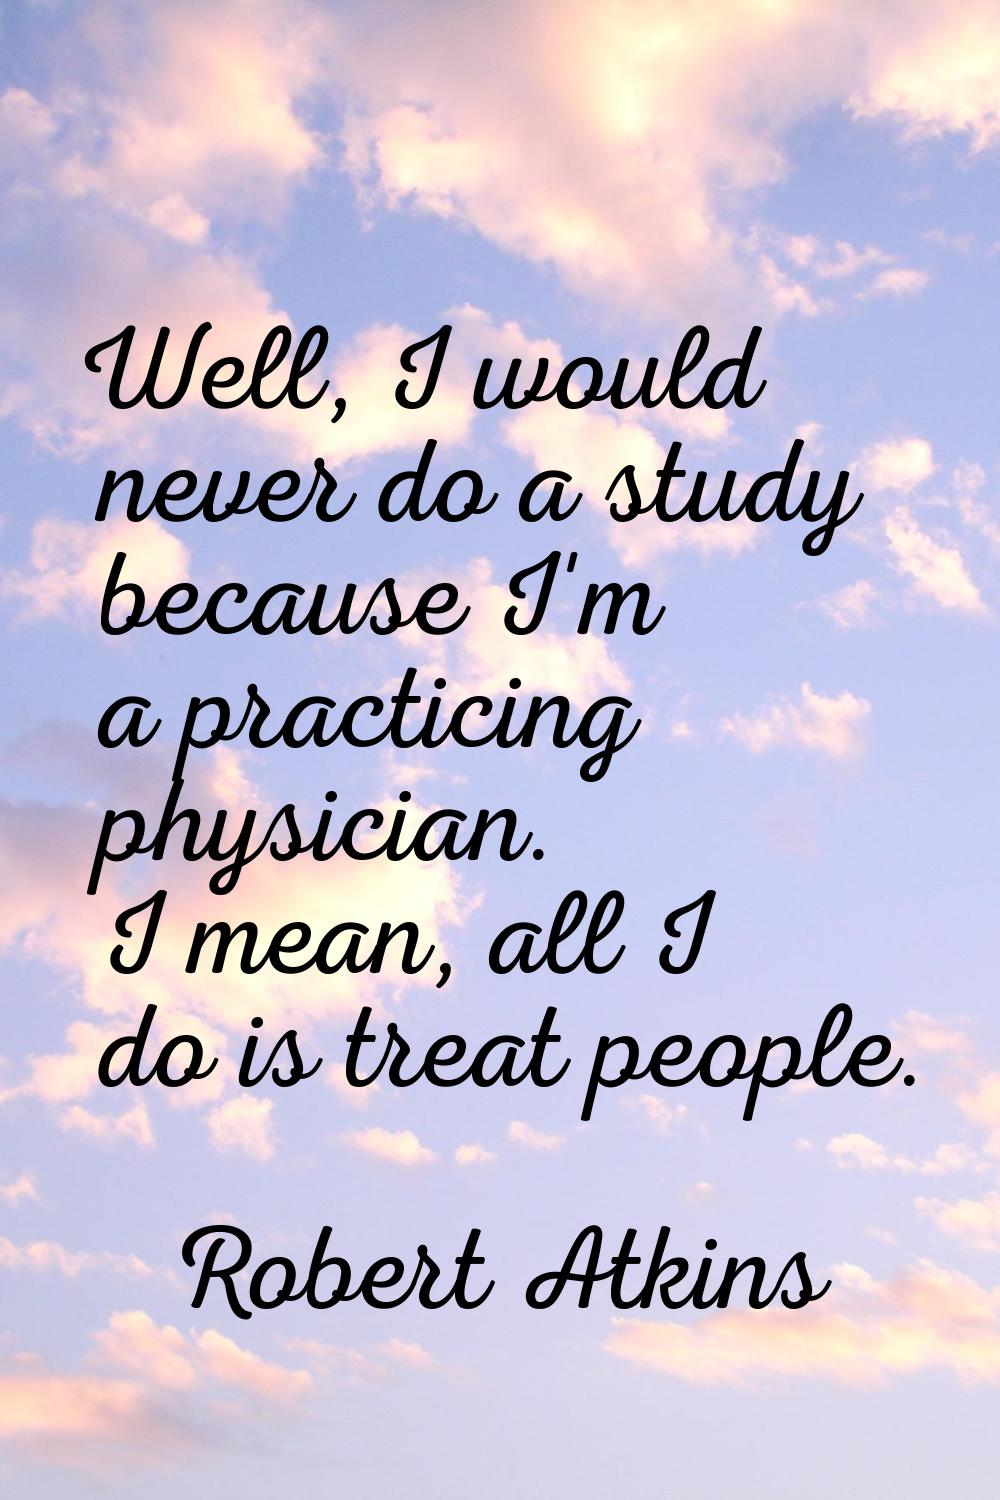 Well, I would never do a study because I'm a practicing physician. I mean, all I do is treat people